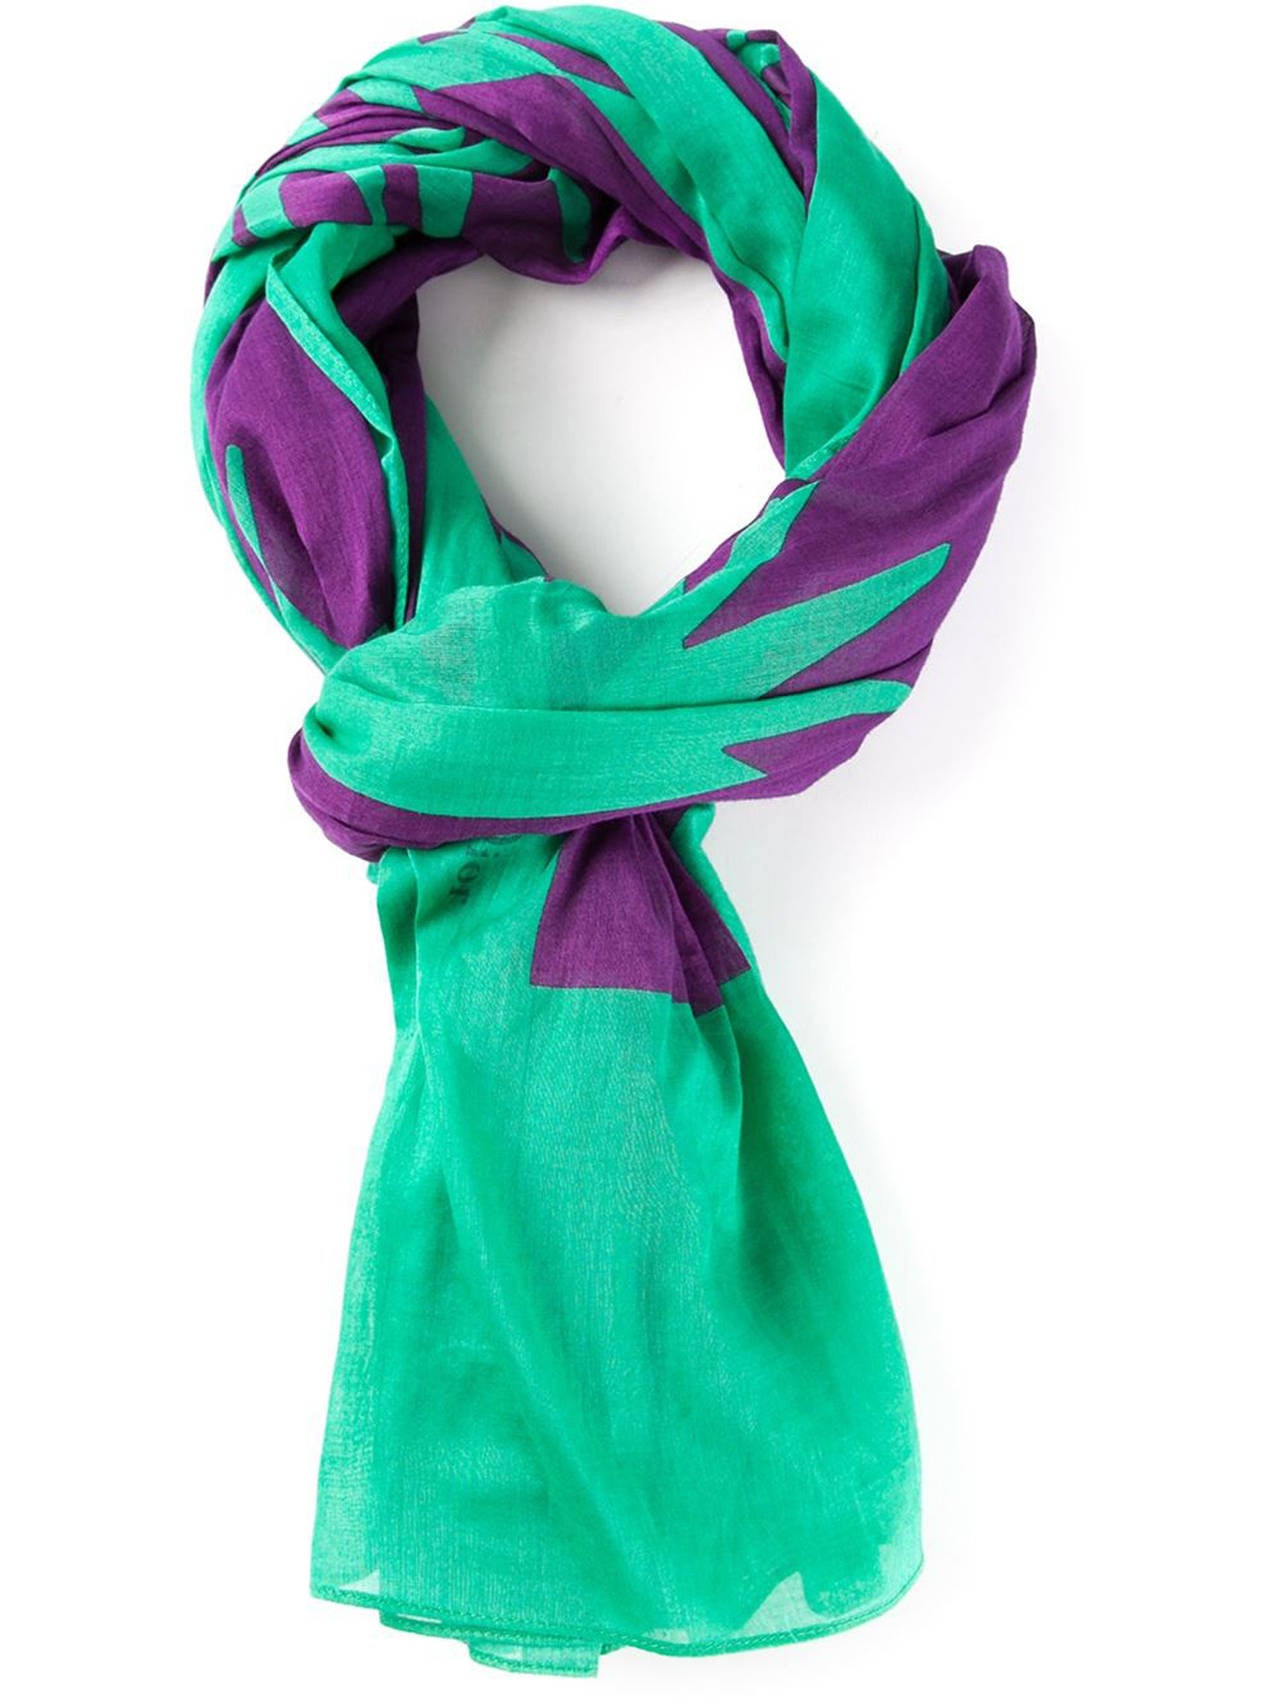 Purple and green cotton voile abstract print large scarf or pareo from Christian Dior.